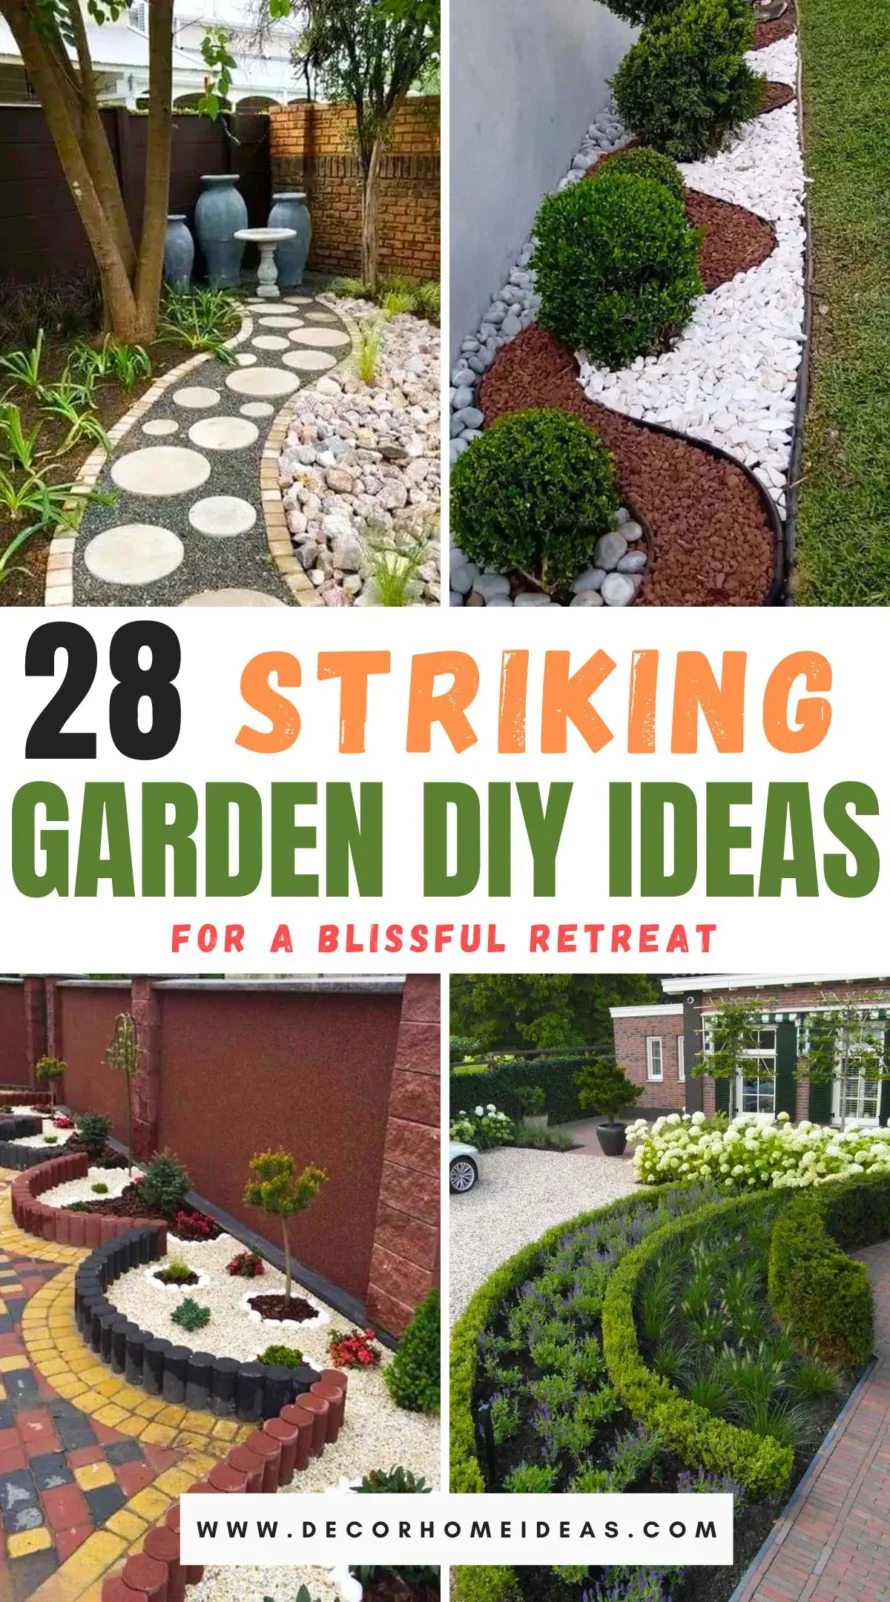 Discover 28 unique DIY garden projects that transform your outdoor space into a serene oasis. From simple planters to enchanting garden paths, these ideas are perfect for any skill level. Dive in to create your blissful retreat!